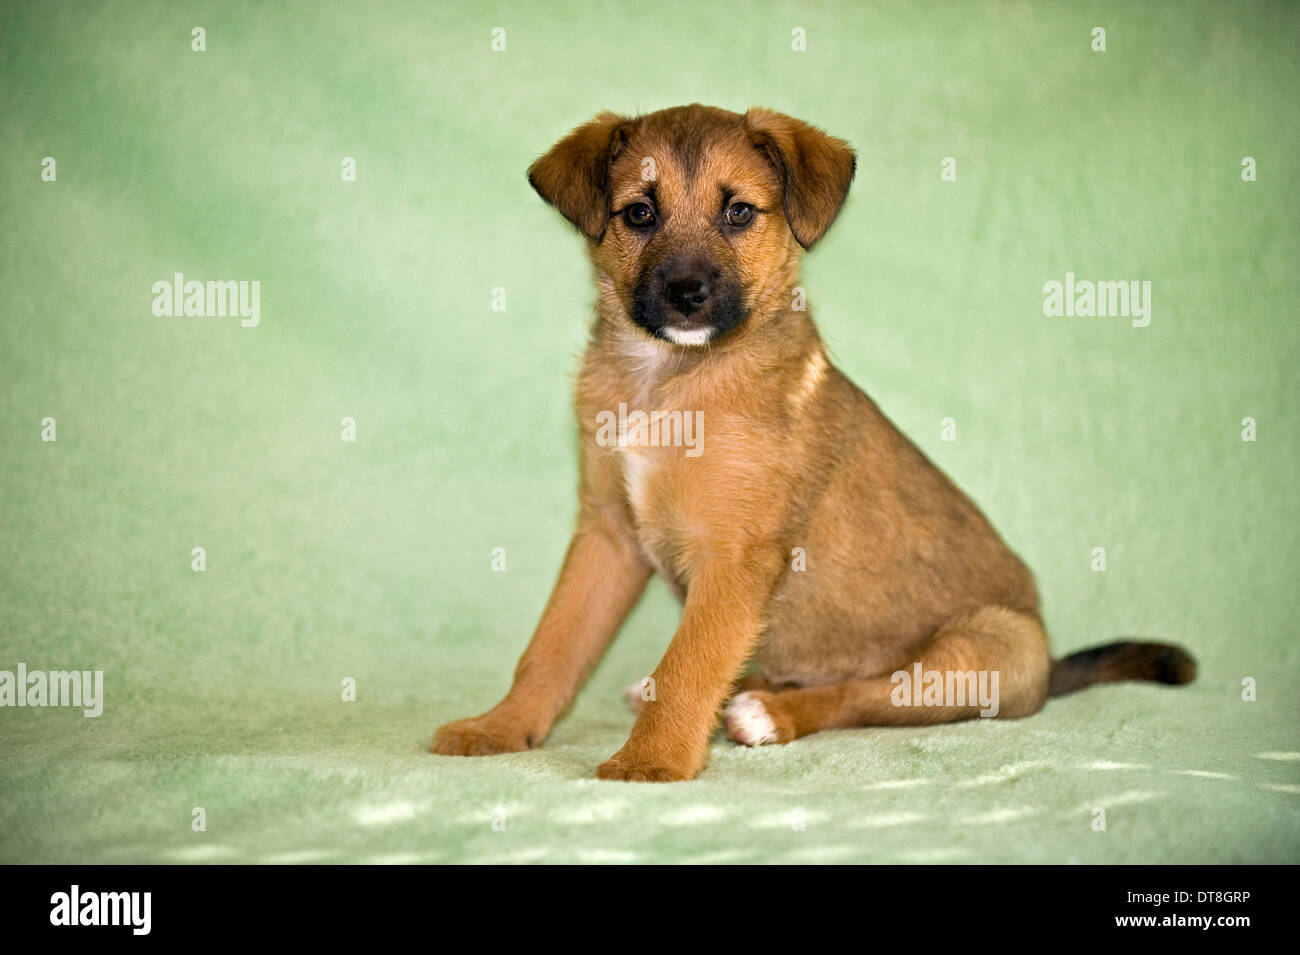 Mixed-breed dog Puppy  sitting on a green blanket Stock Photo